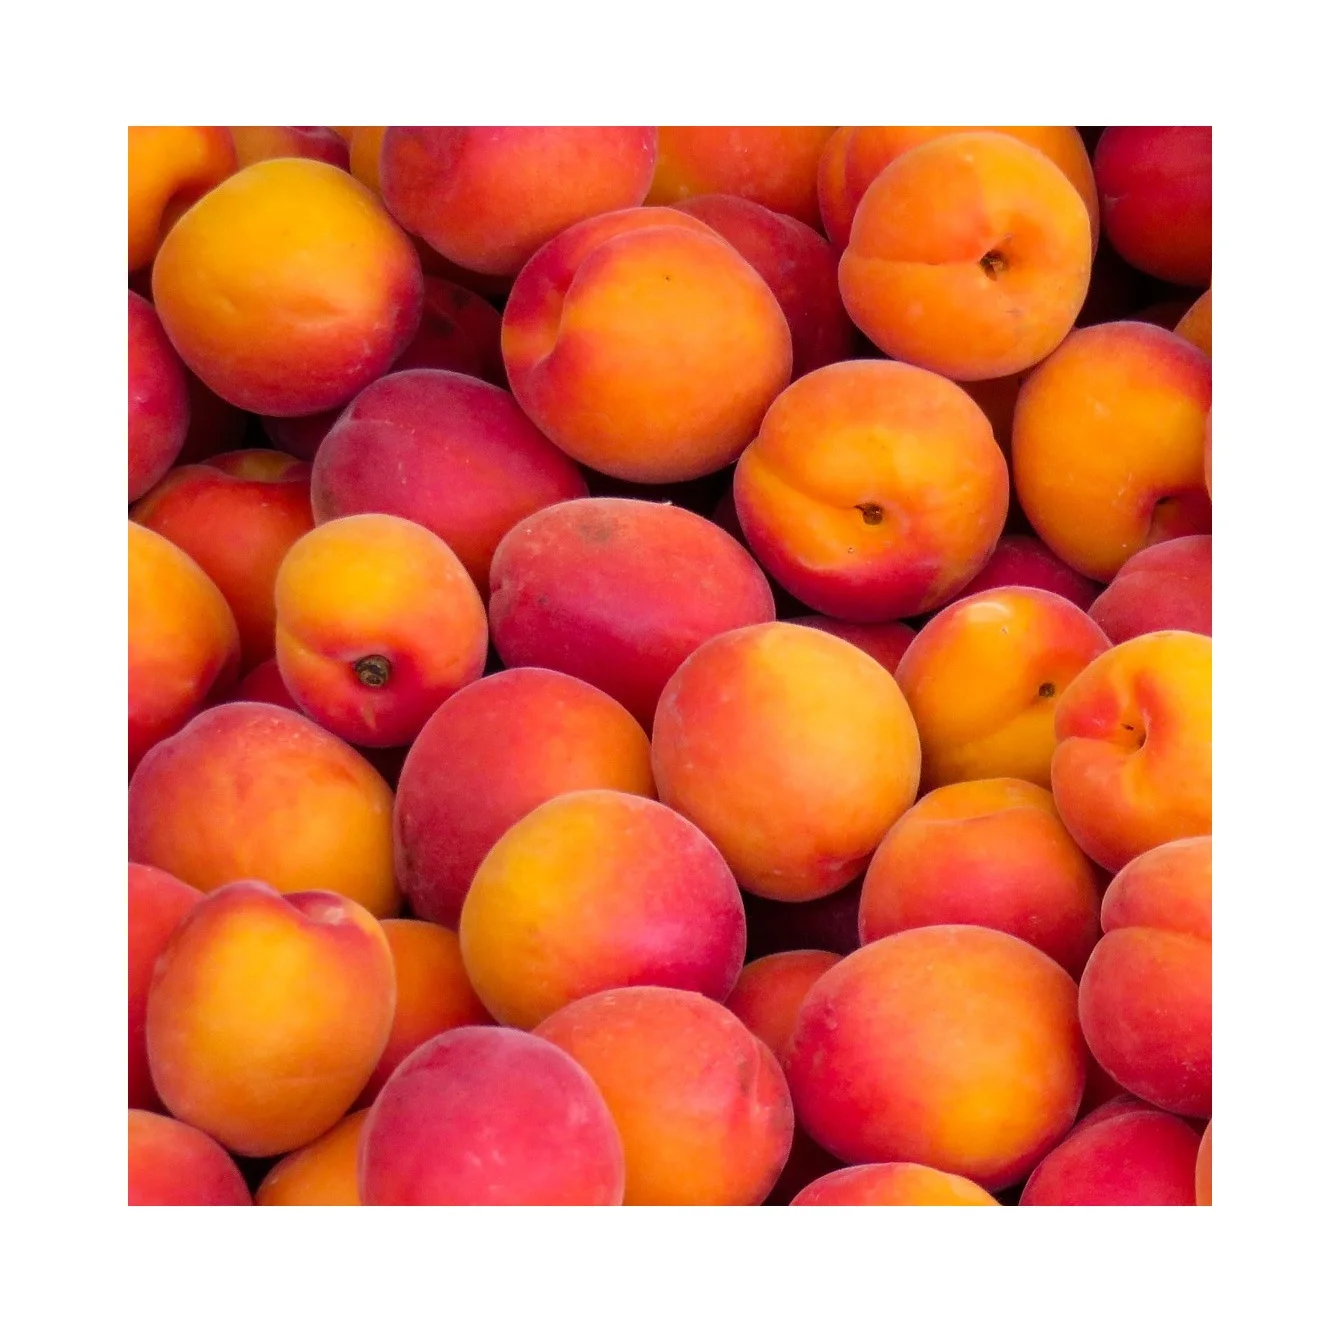 Cheap Price Bulk Stock Fresh Fruit Nectarines For Sale In Bulk With Fast Delivery